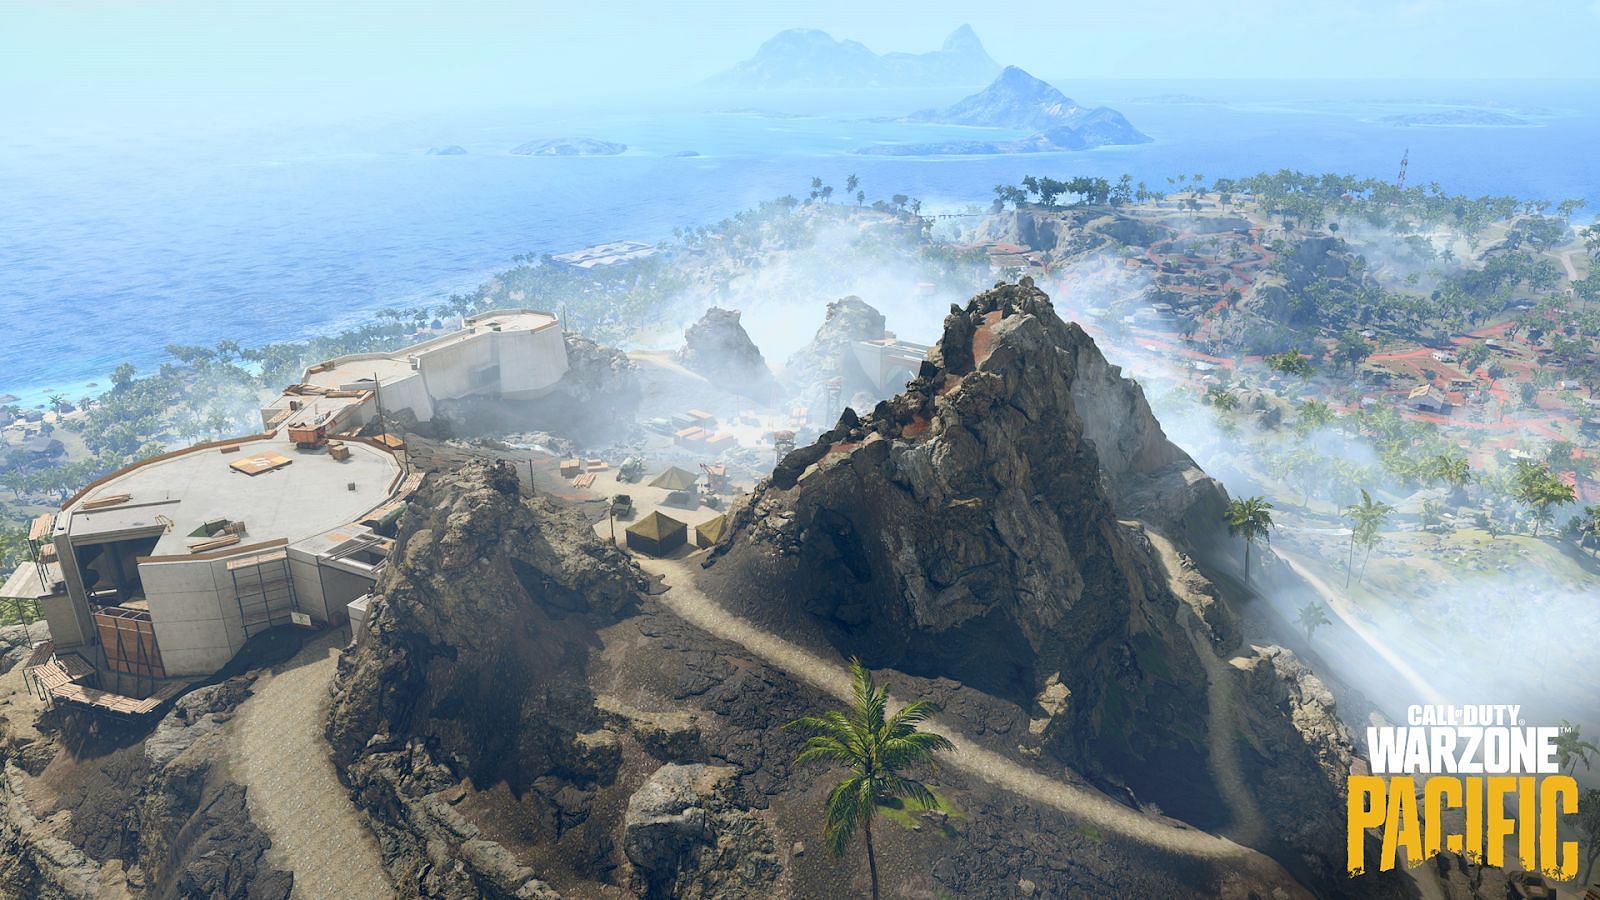 Warzone Pacific (Image by Activision)